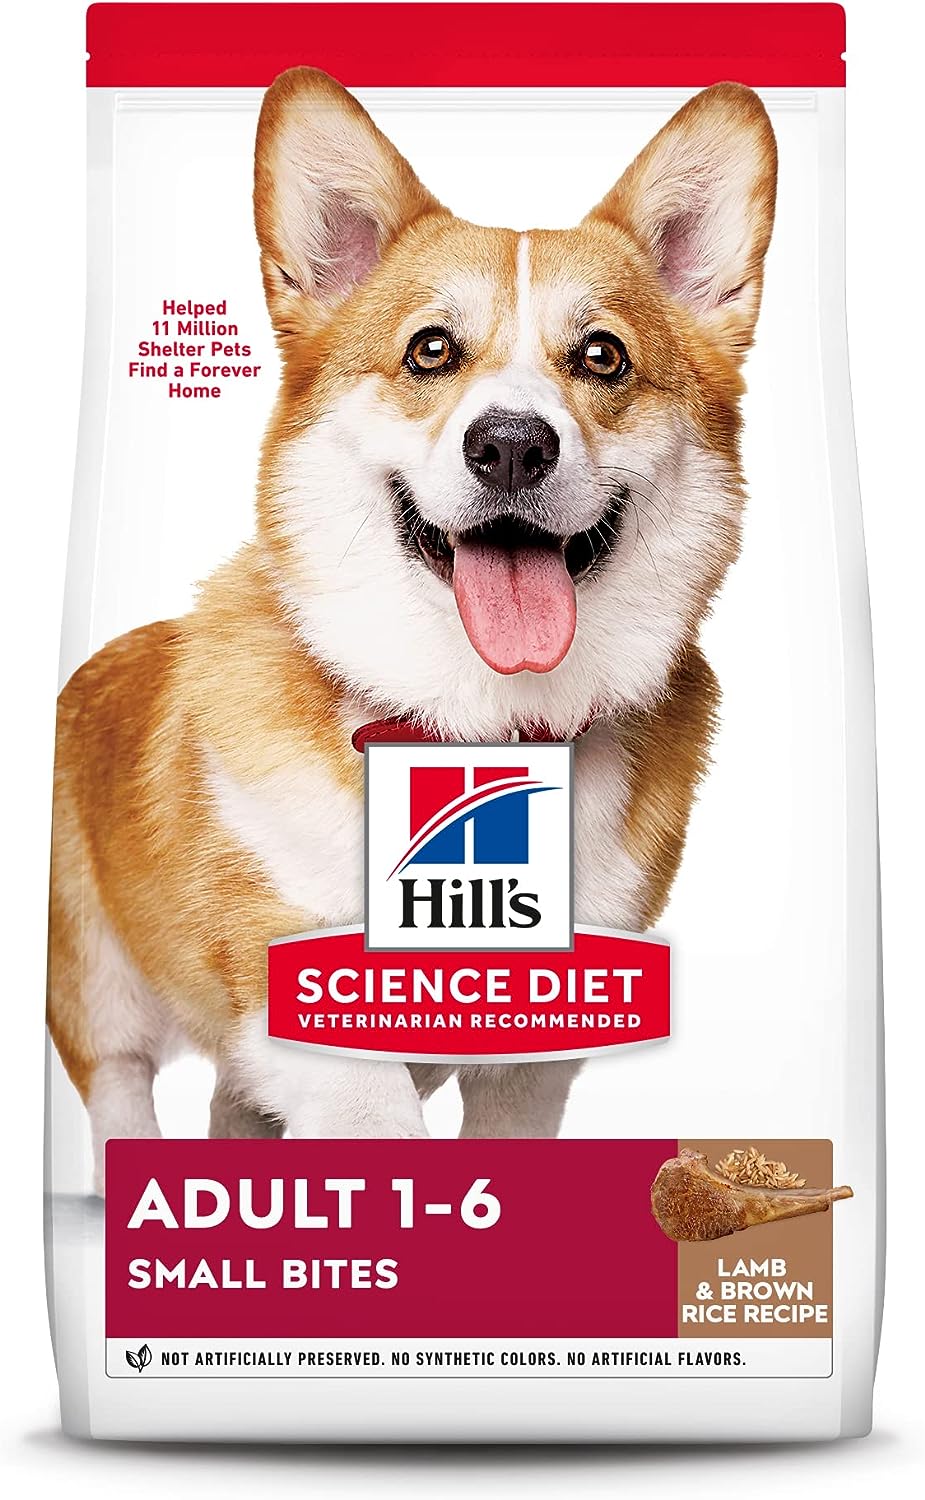 Hill’s Science Diet Adult 1-6 Small Bites Lamb Meal & Brown Rice Recipe Dry Dog Food – Gallery Image 1